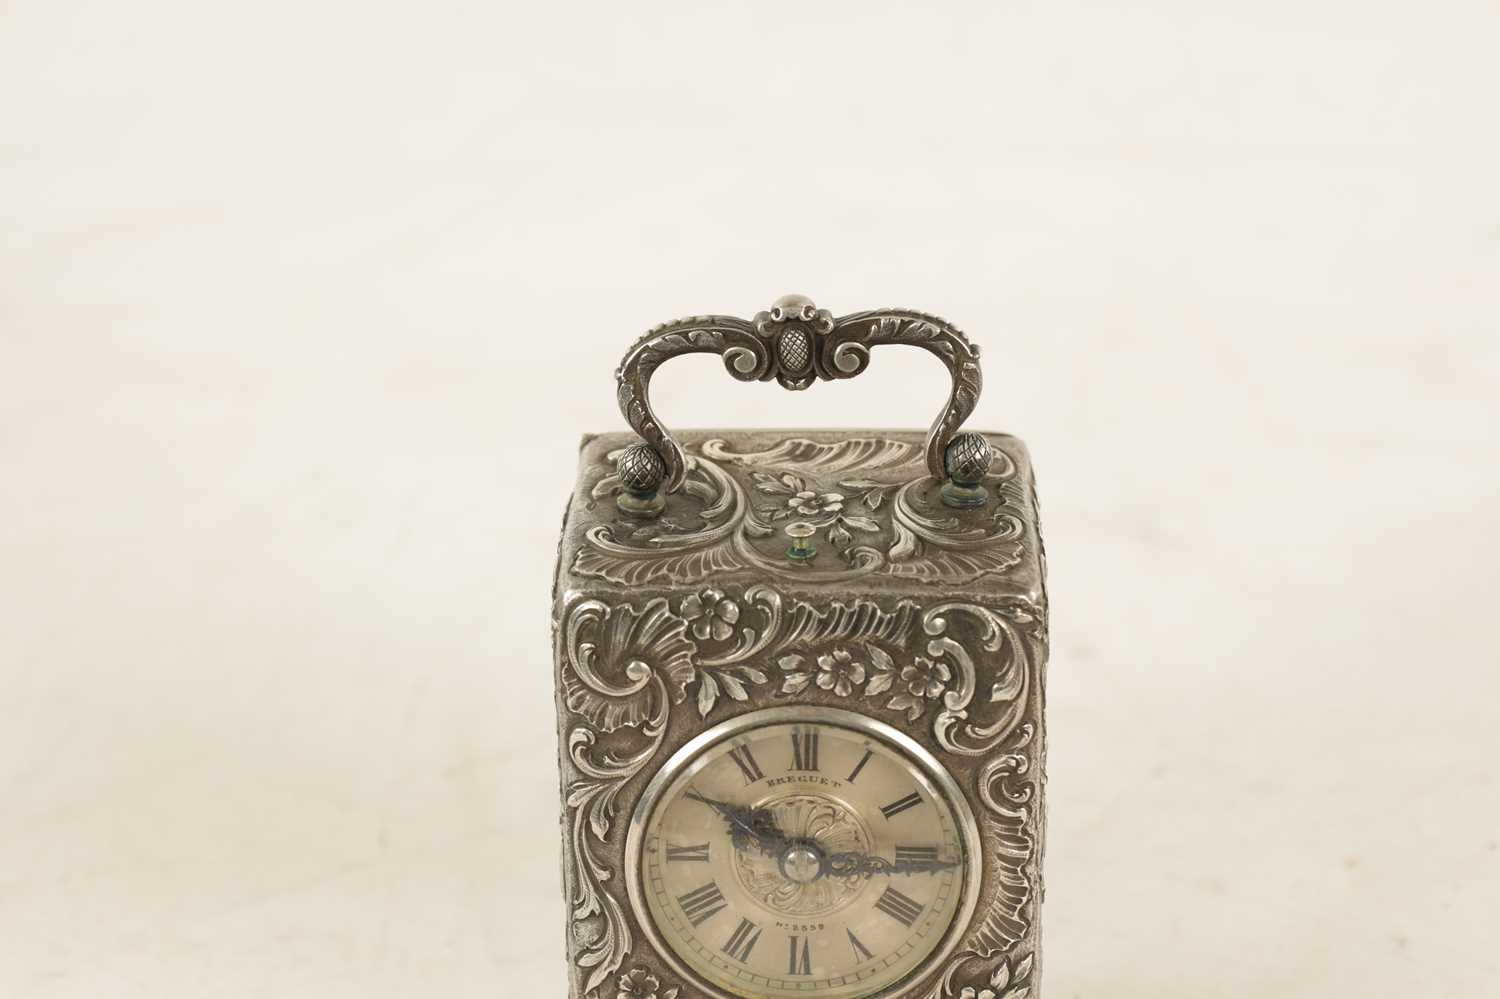 BREGUET, PARIS NO. 2559. A LATE 19TH CENTURY FRENCH SOLID SILVER REPEATING CARRIAGE CLOCK IN ORIGIN - Image 8 of 11